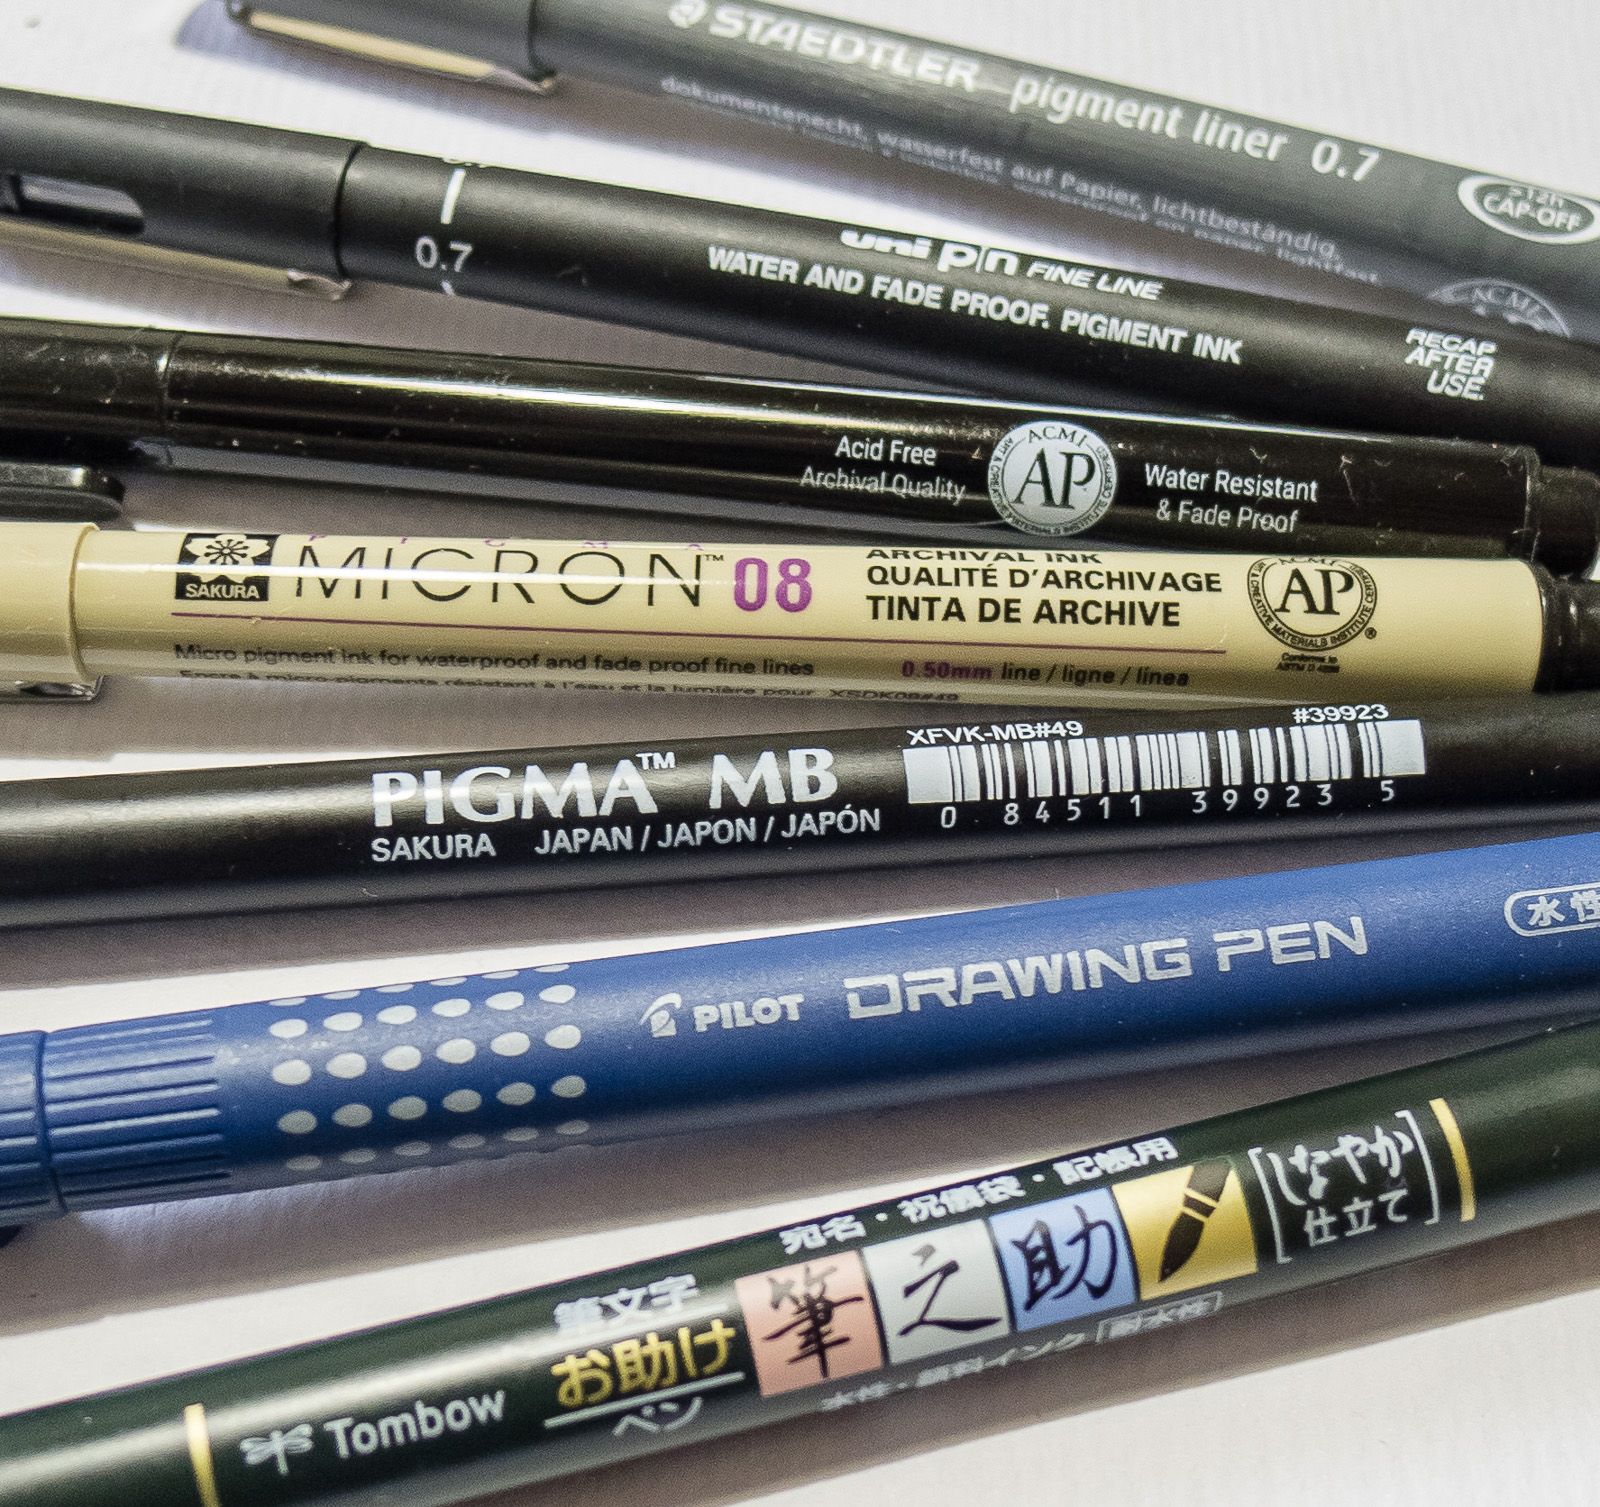 Not all pens are made equal: waterproof pen roundup, Tim Baker